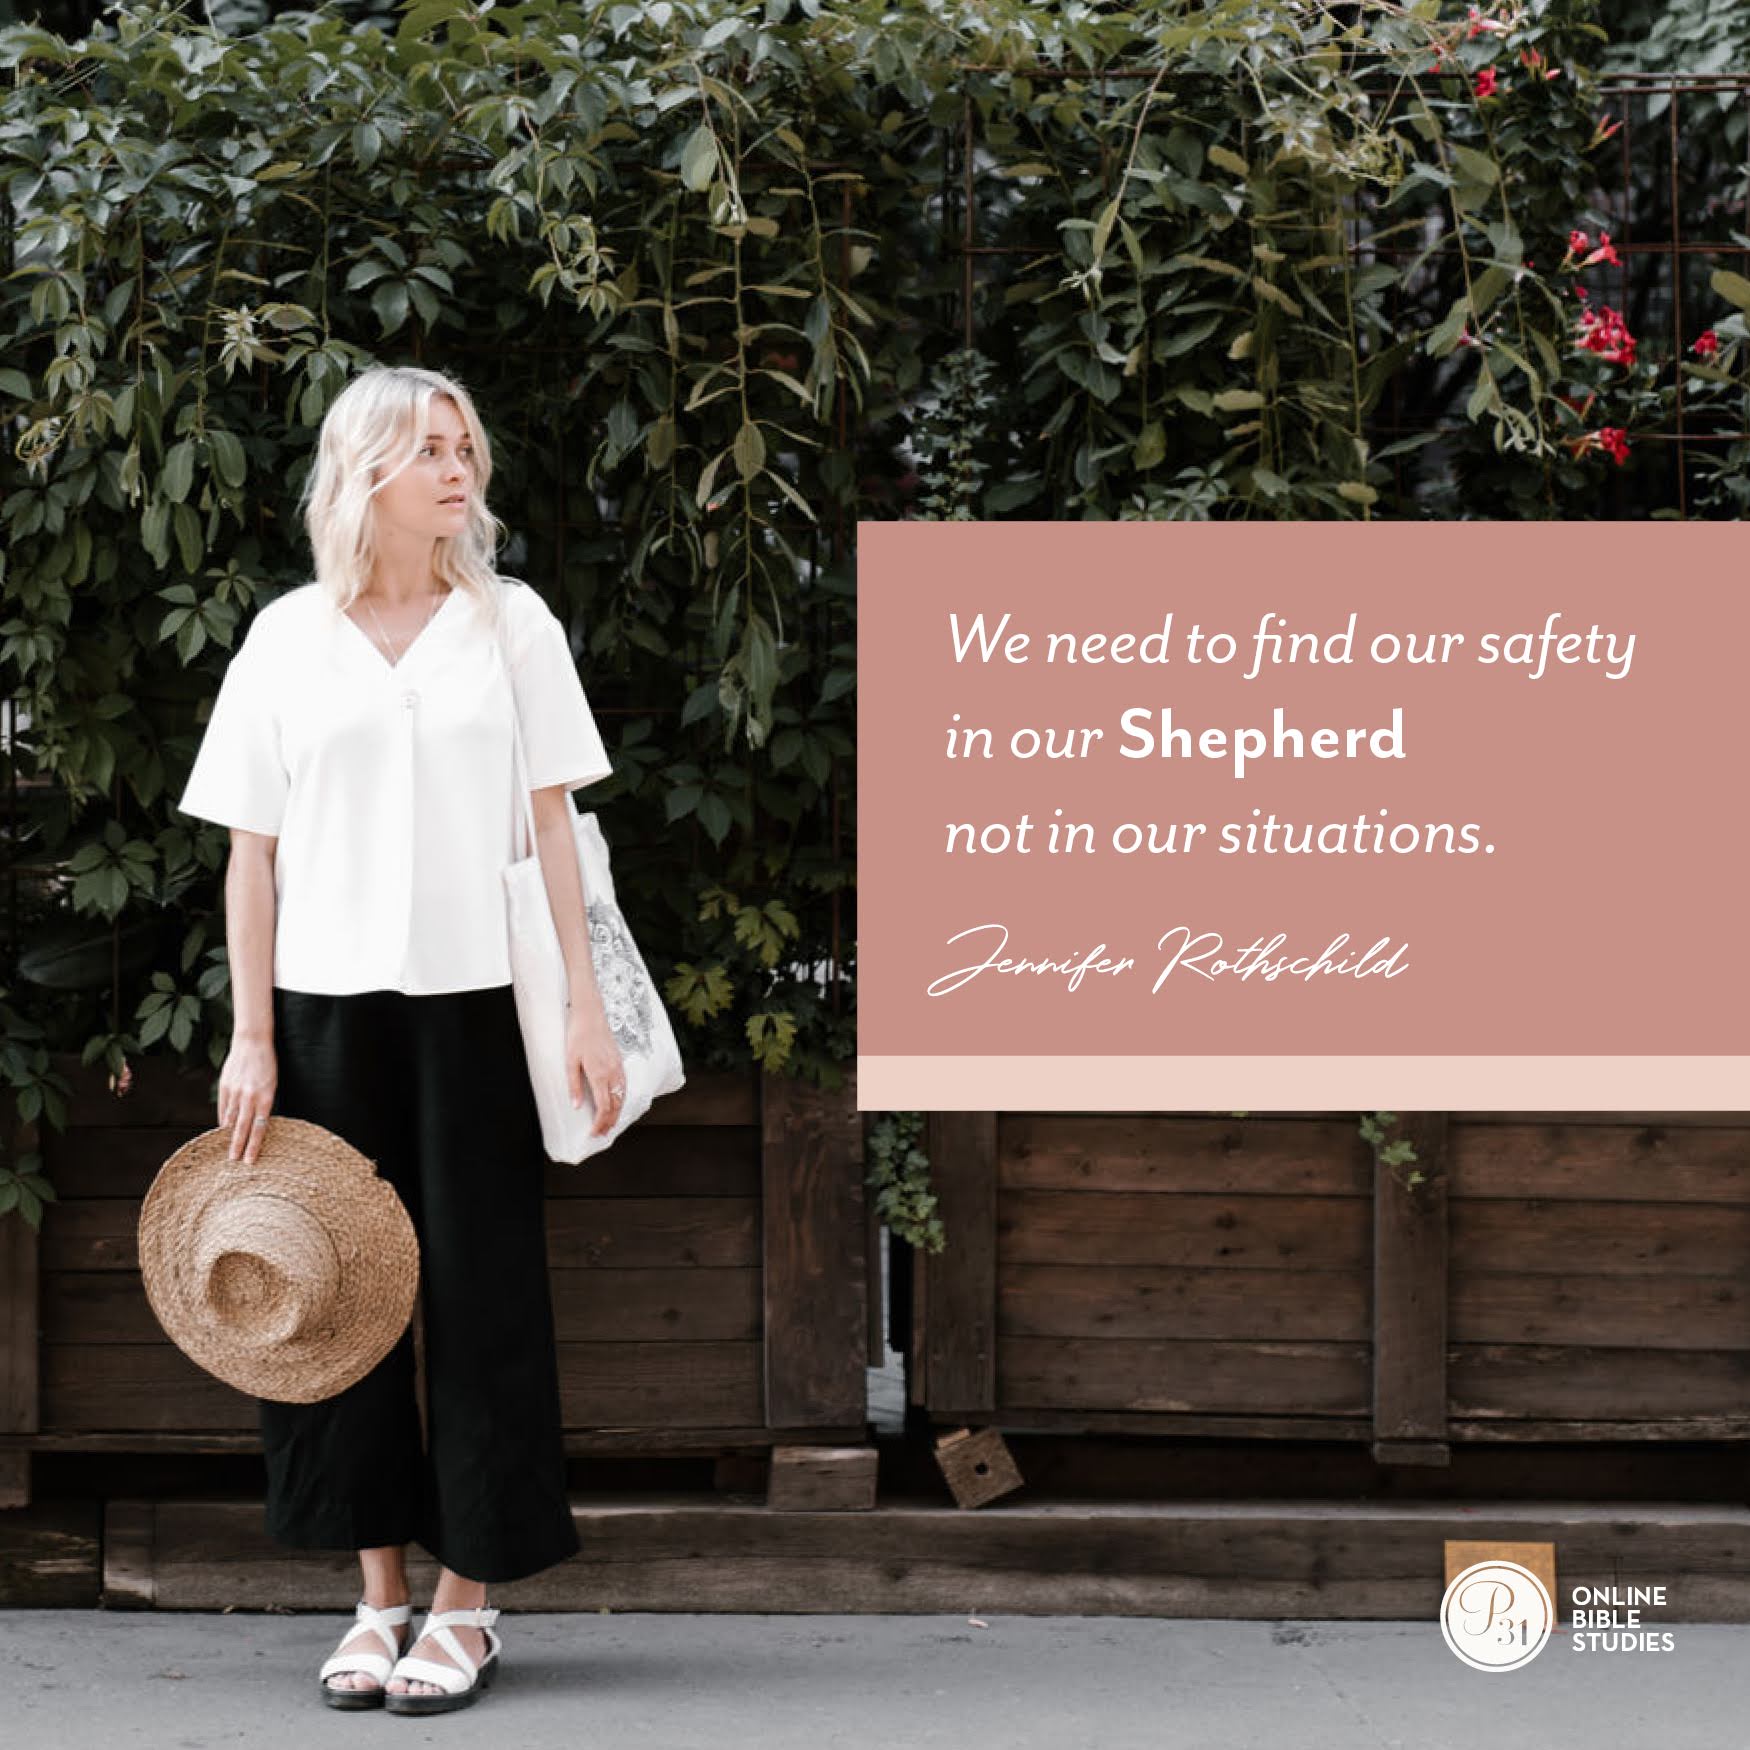 “We need to find our safety in our Shepherd and not our situations.” - Jennifer Rothschild  #Psalm23Study | Proverbs 31 Online Bible Studies Week 2 #P31OBS